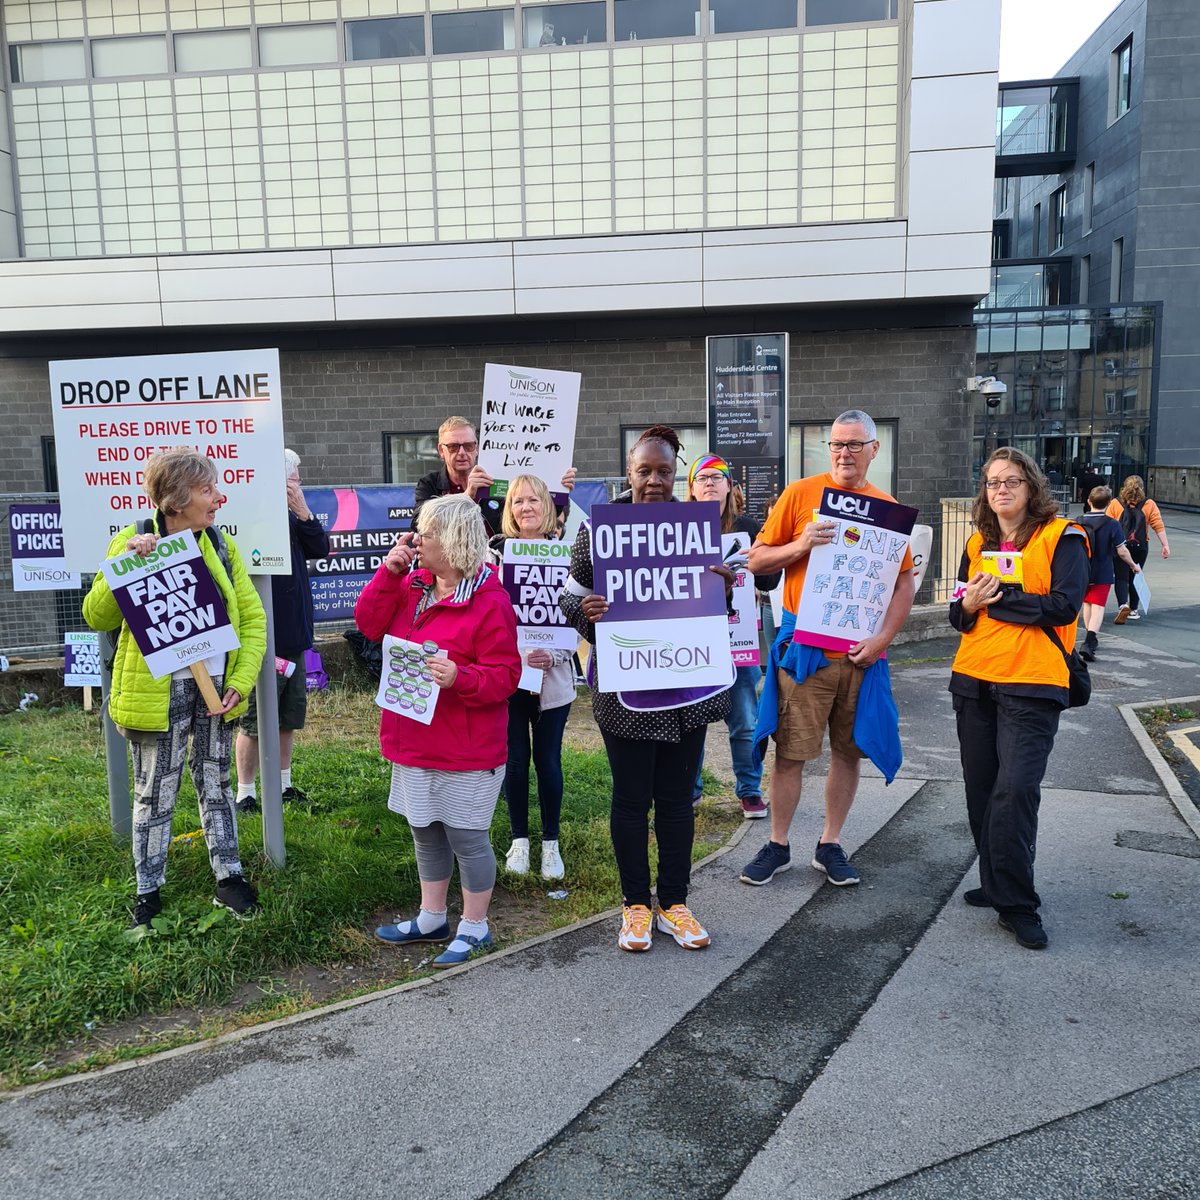 Striking workers at Kirklees College will be back on the picket line from 8am tomorrow morning. All welcome to come along and show your support.